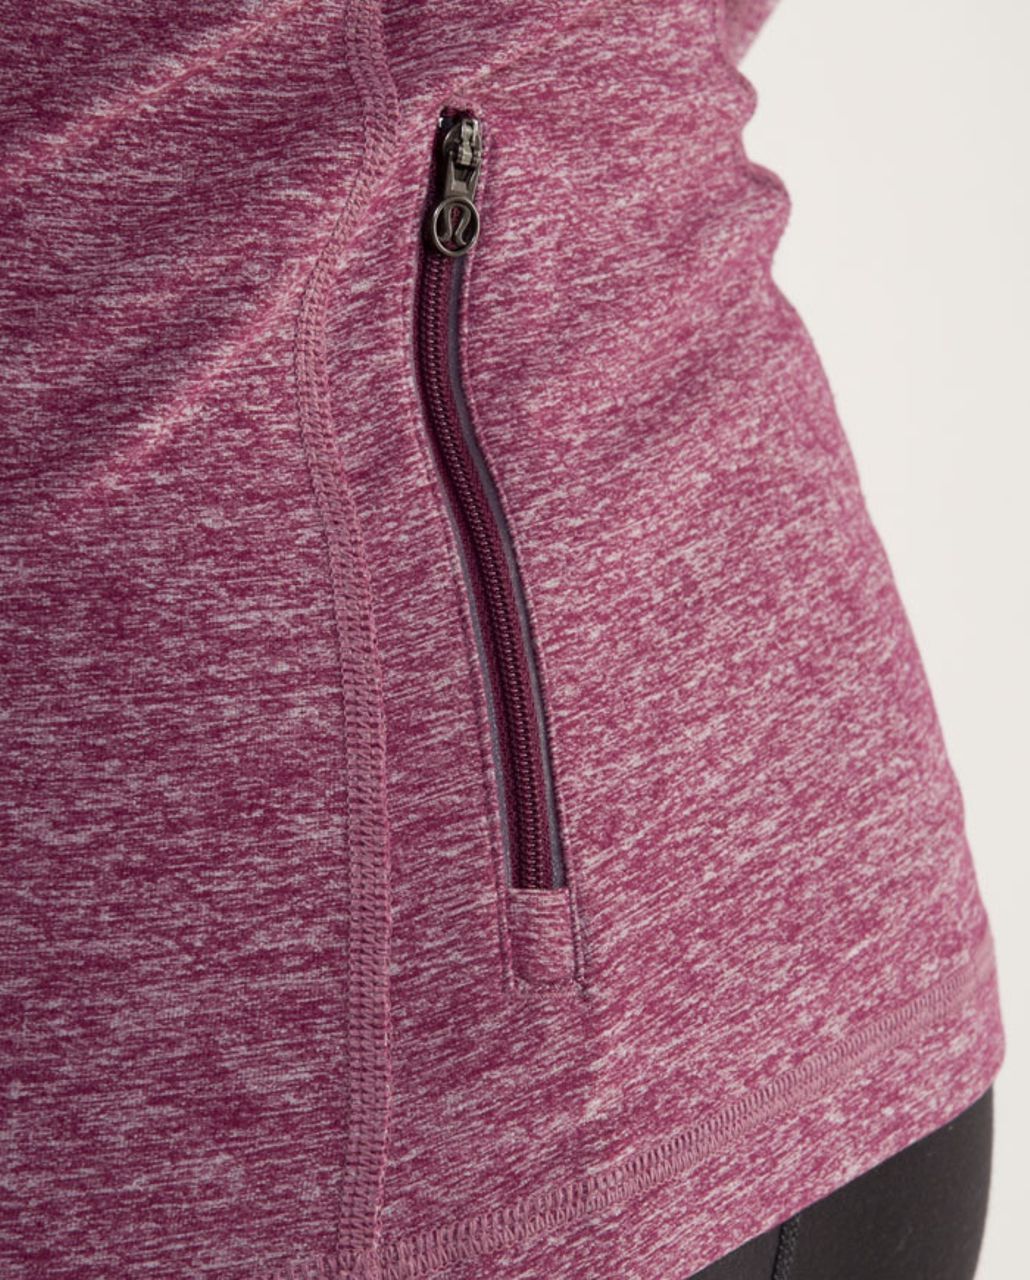 Lululemon Run:  Your Heart Out Pullover - Heathered Plum